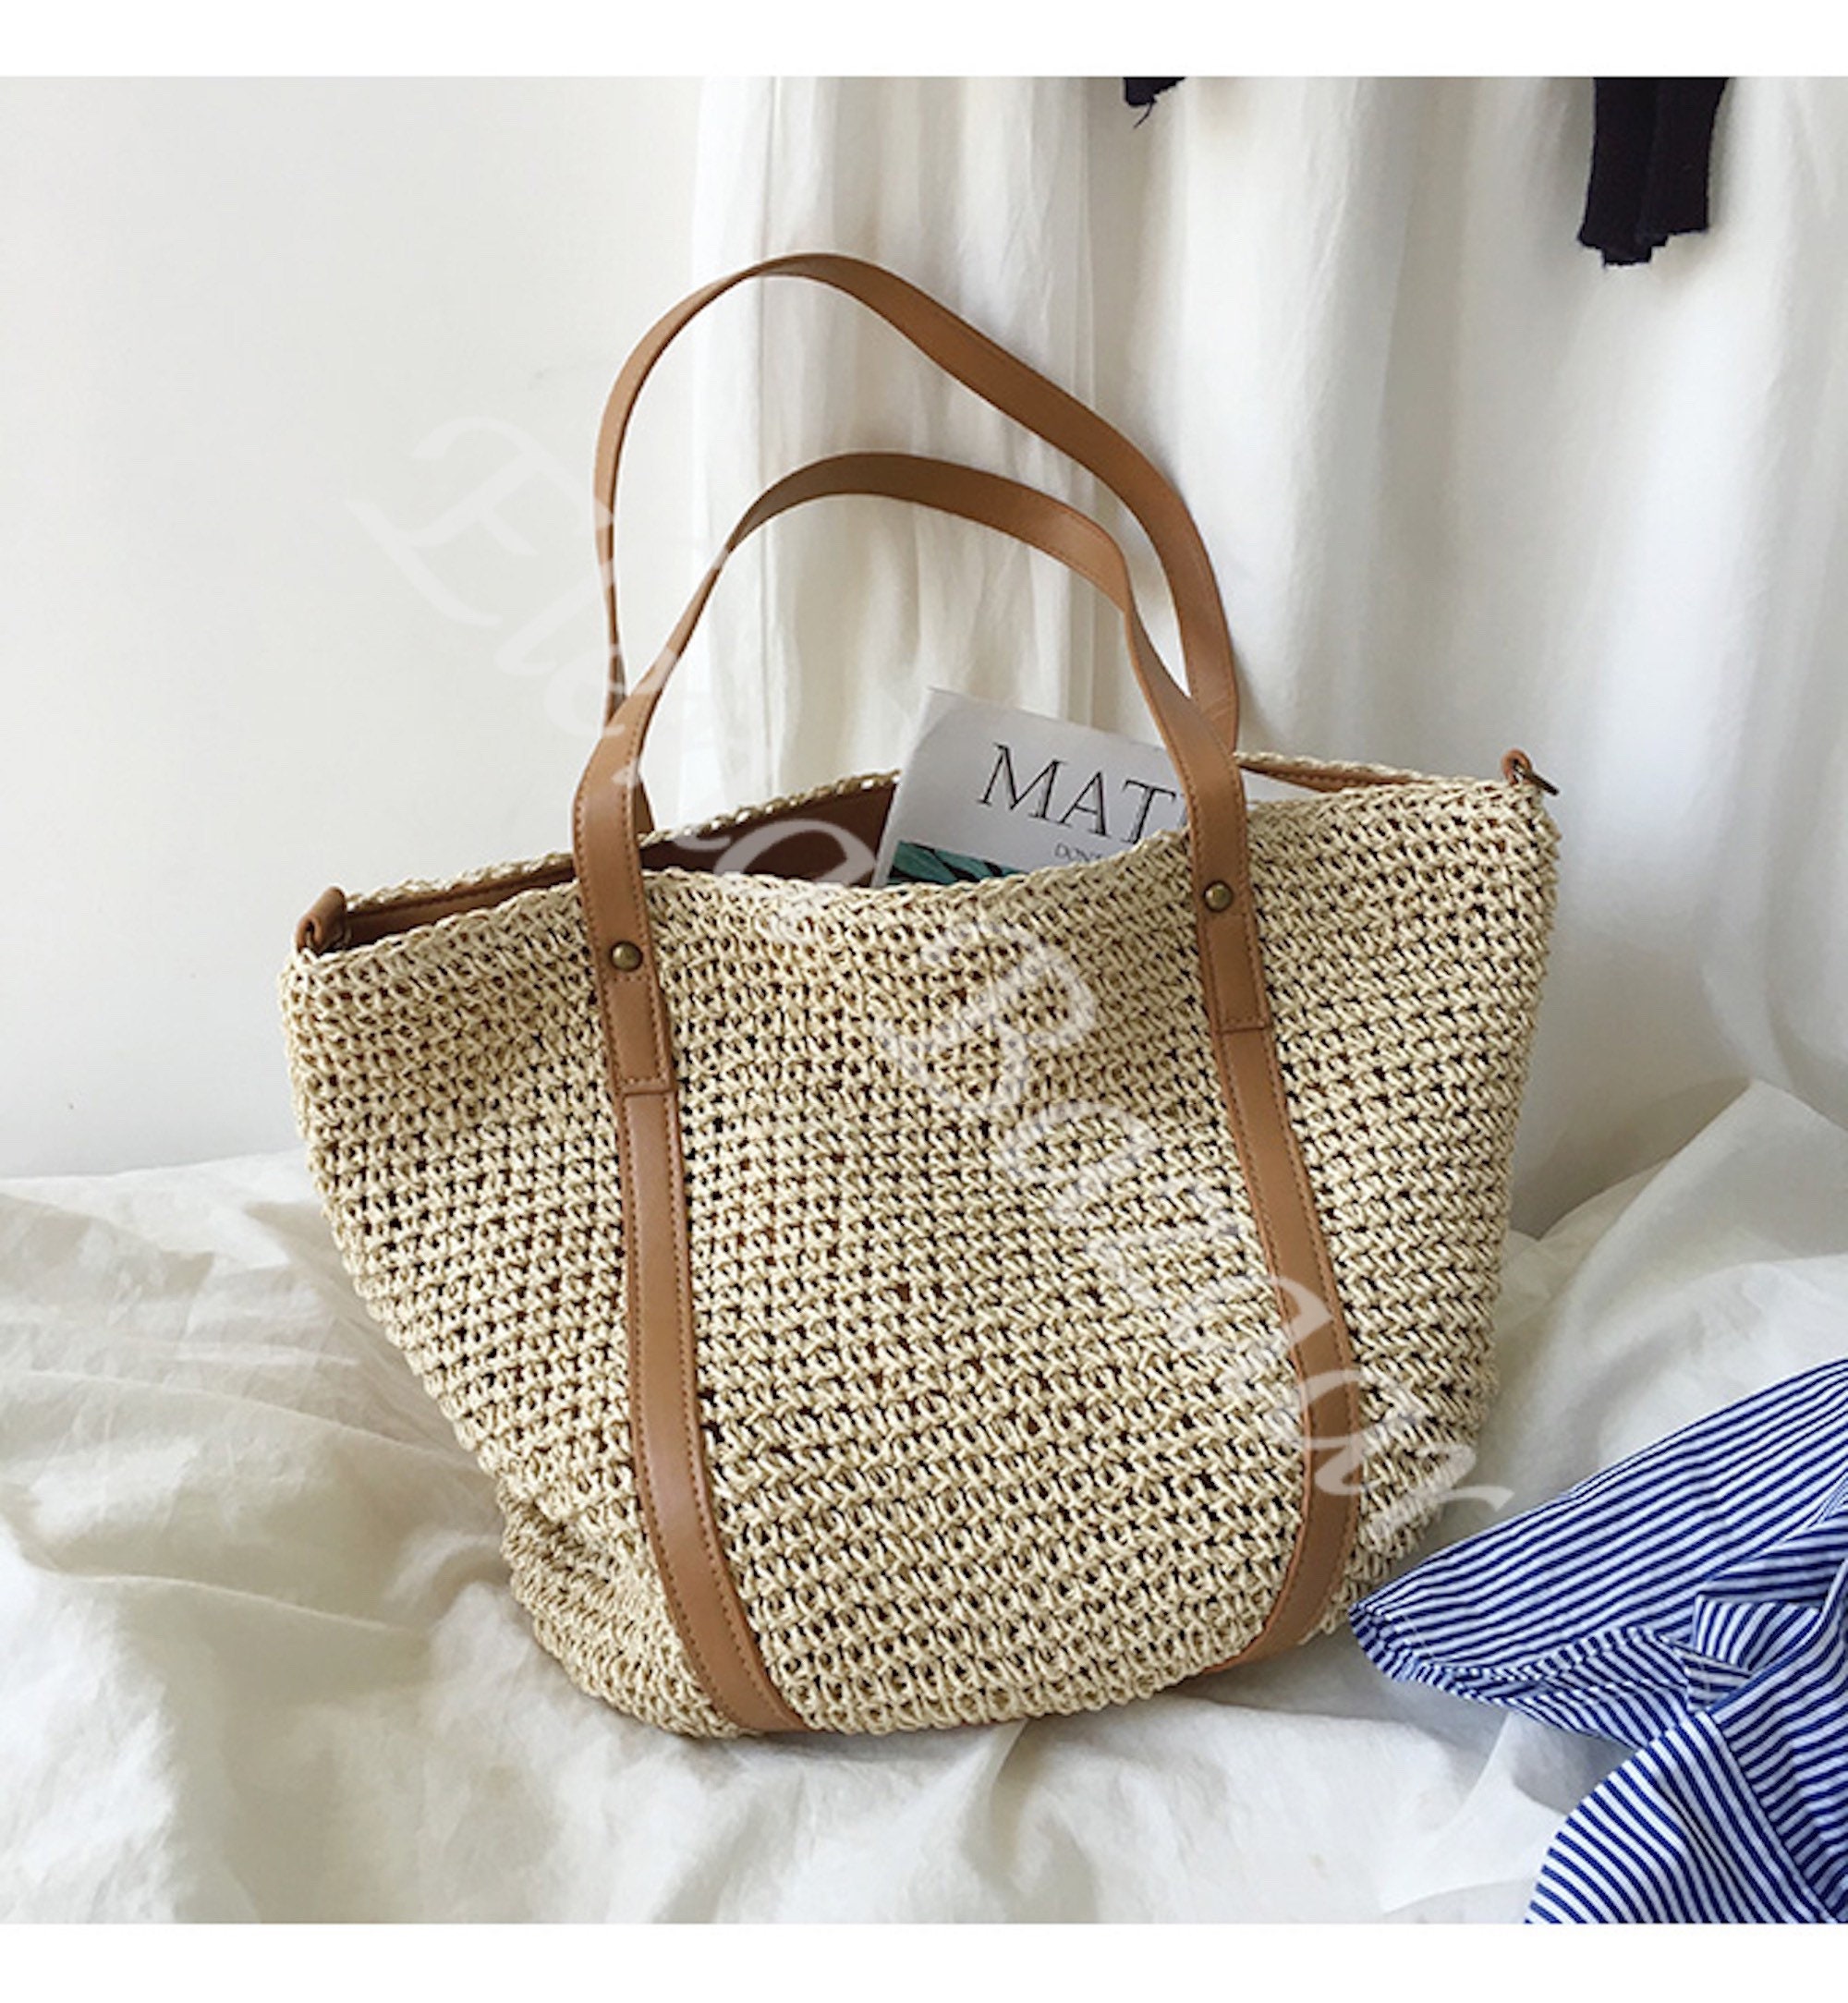 Women's Straw Weave Tote Bag Hand Woven Fashion Casual - Etsy